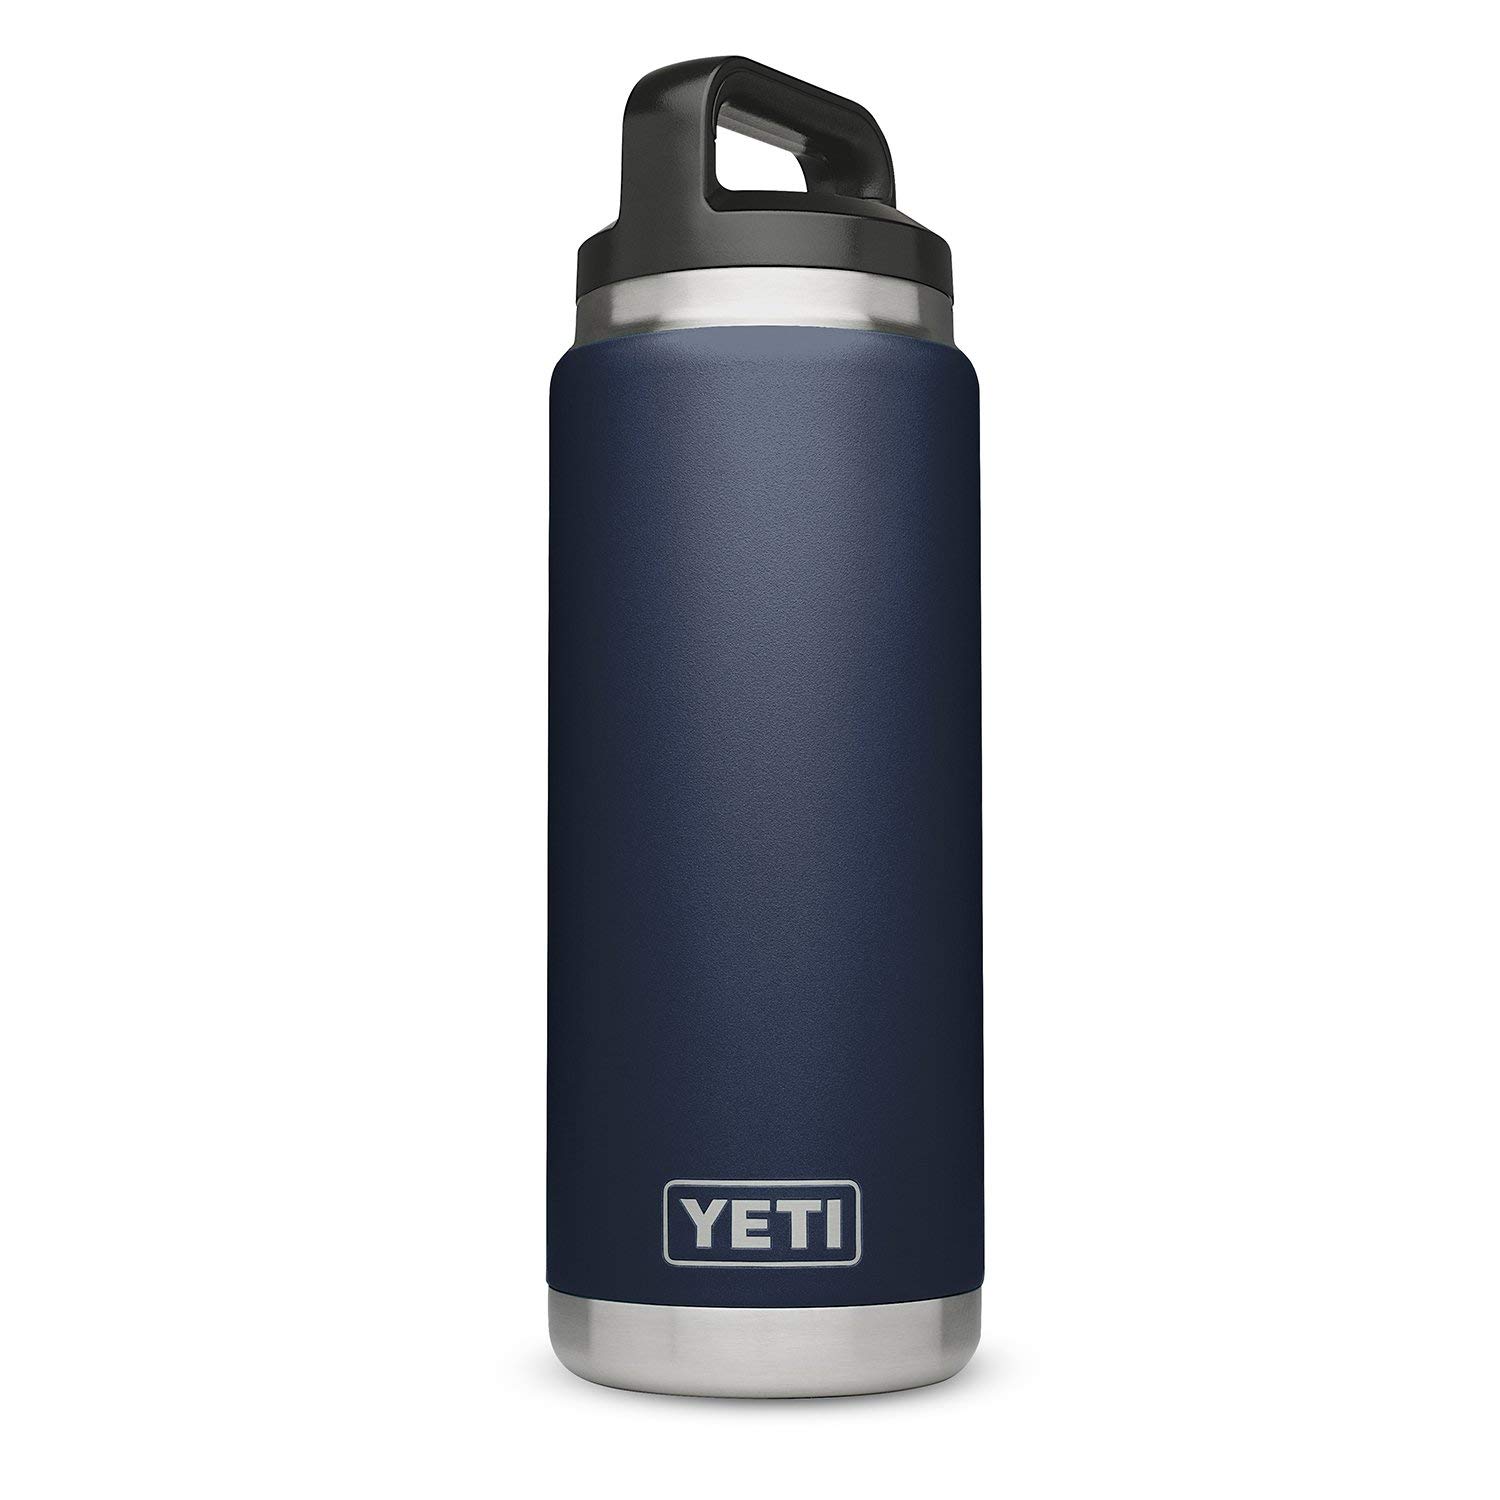 YETI Rambler 26oz Vacuum Insulated Stainless Steel Bottle with Cap